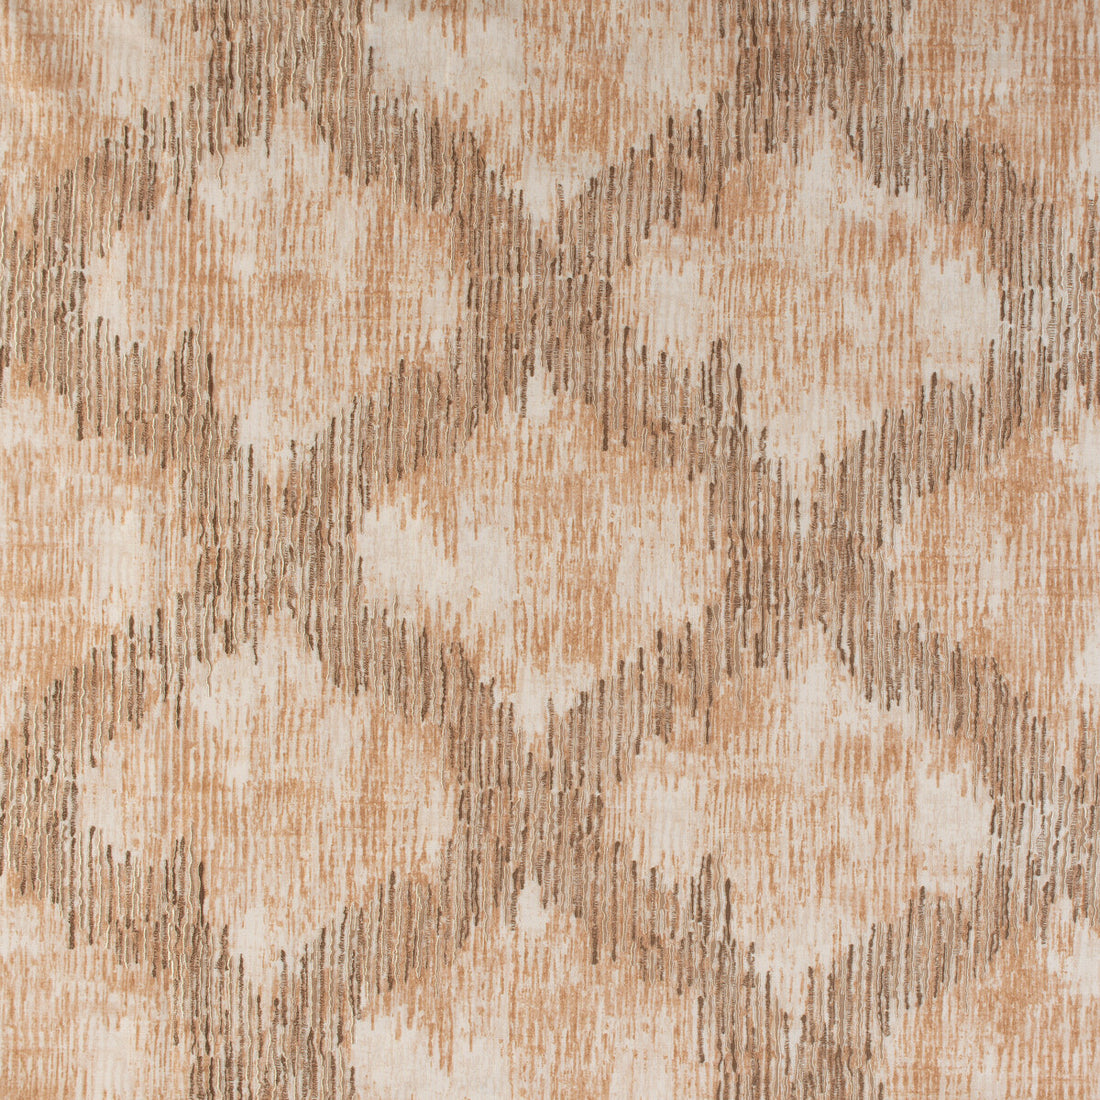 Shimmersea fabric in canyon color - pattern SHIMMERSEA.1624.0 - by Kravet Design in the Barbara Barry Home Midsummer collection